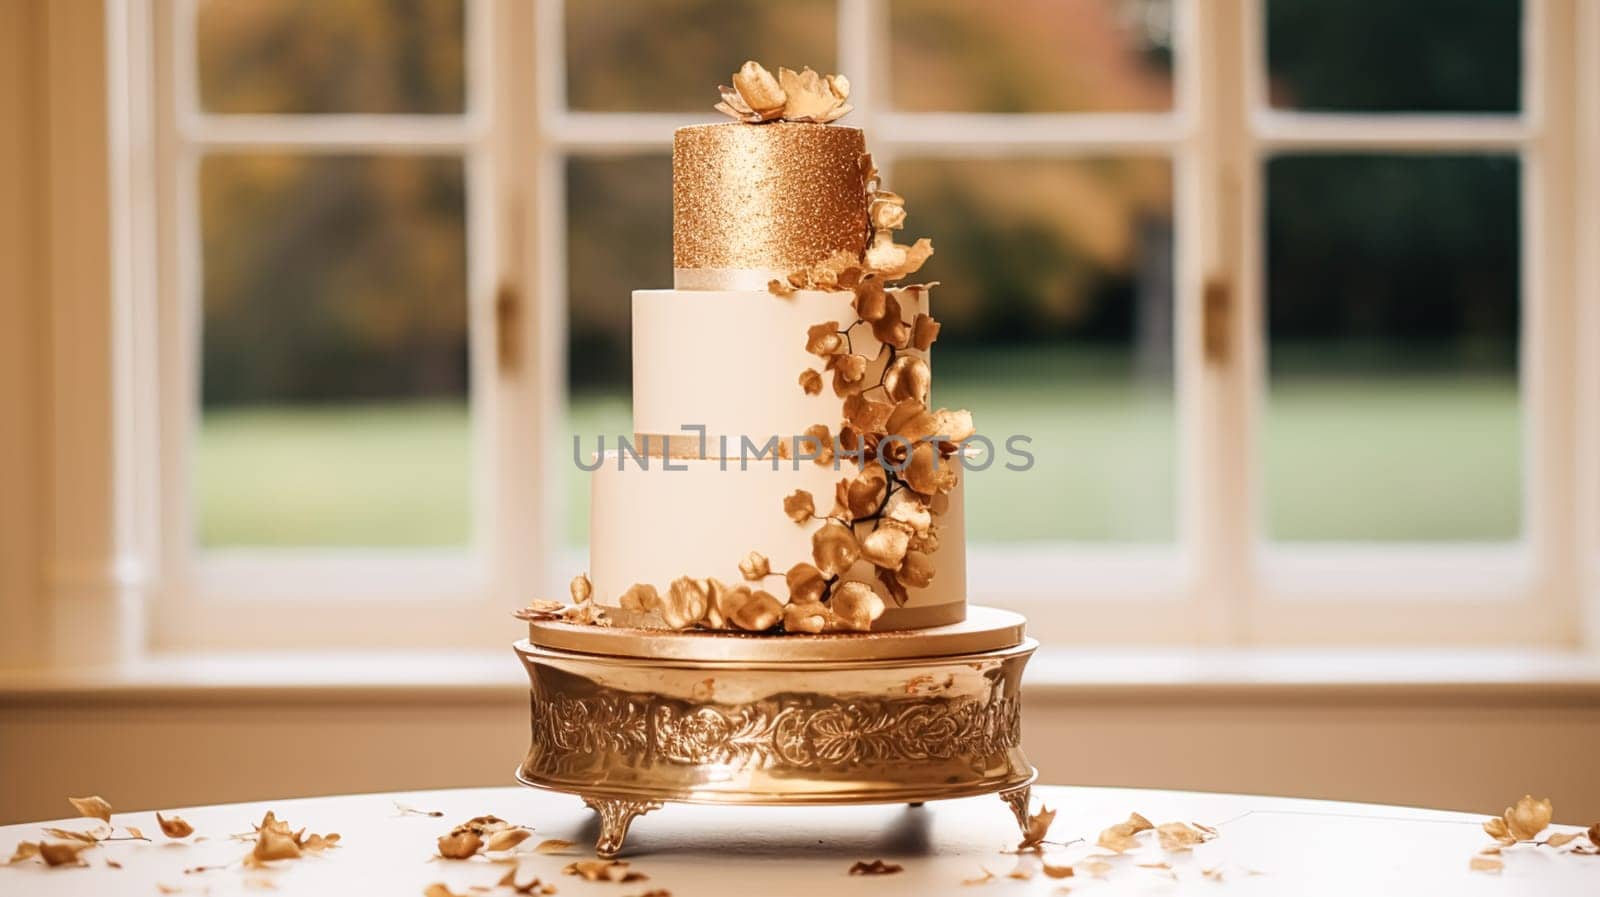 Wedding cake design, autumnal dessert styling and holiday decoration, multi-tier cake for an autumn event venue, food catering service and elegant country decor, cottage style inspiration